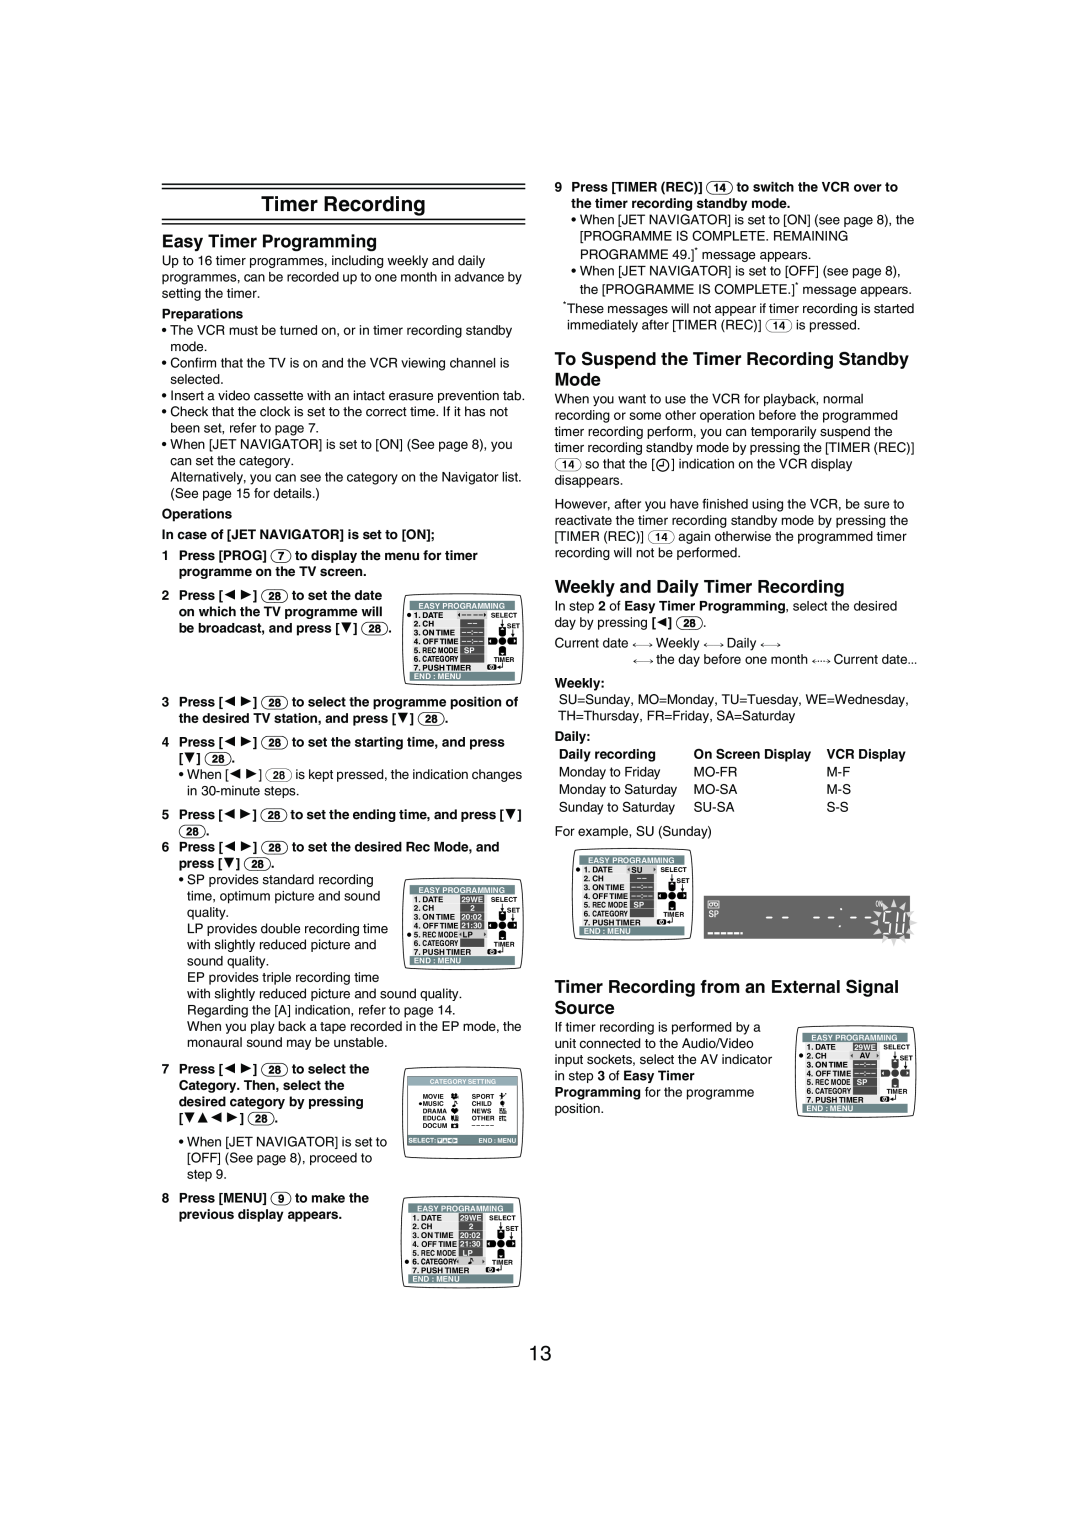 Panasonic NV-MV21 Series specifications Easy Timer Programming, To Suspend the Timer Recording Standby Mode 